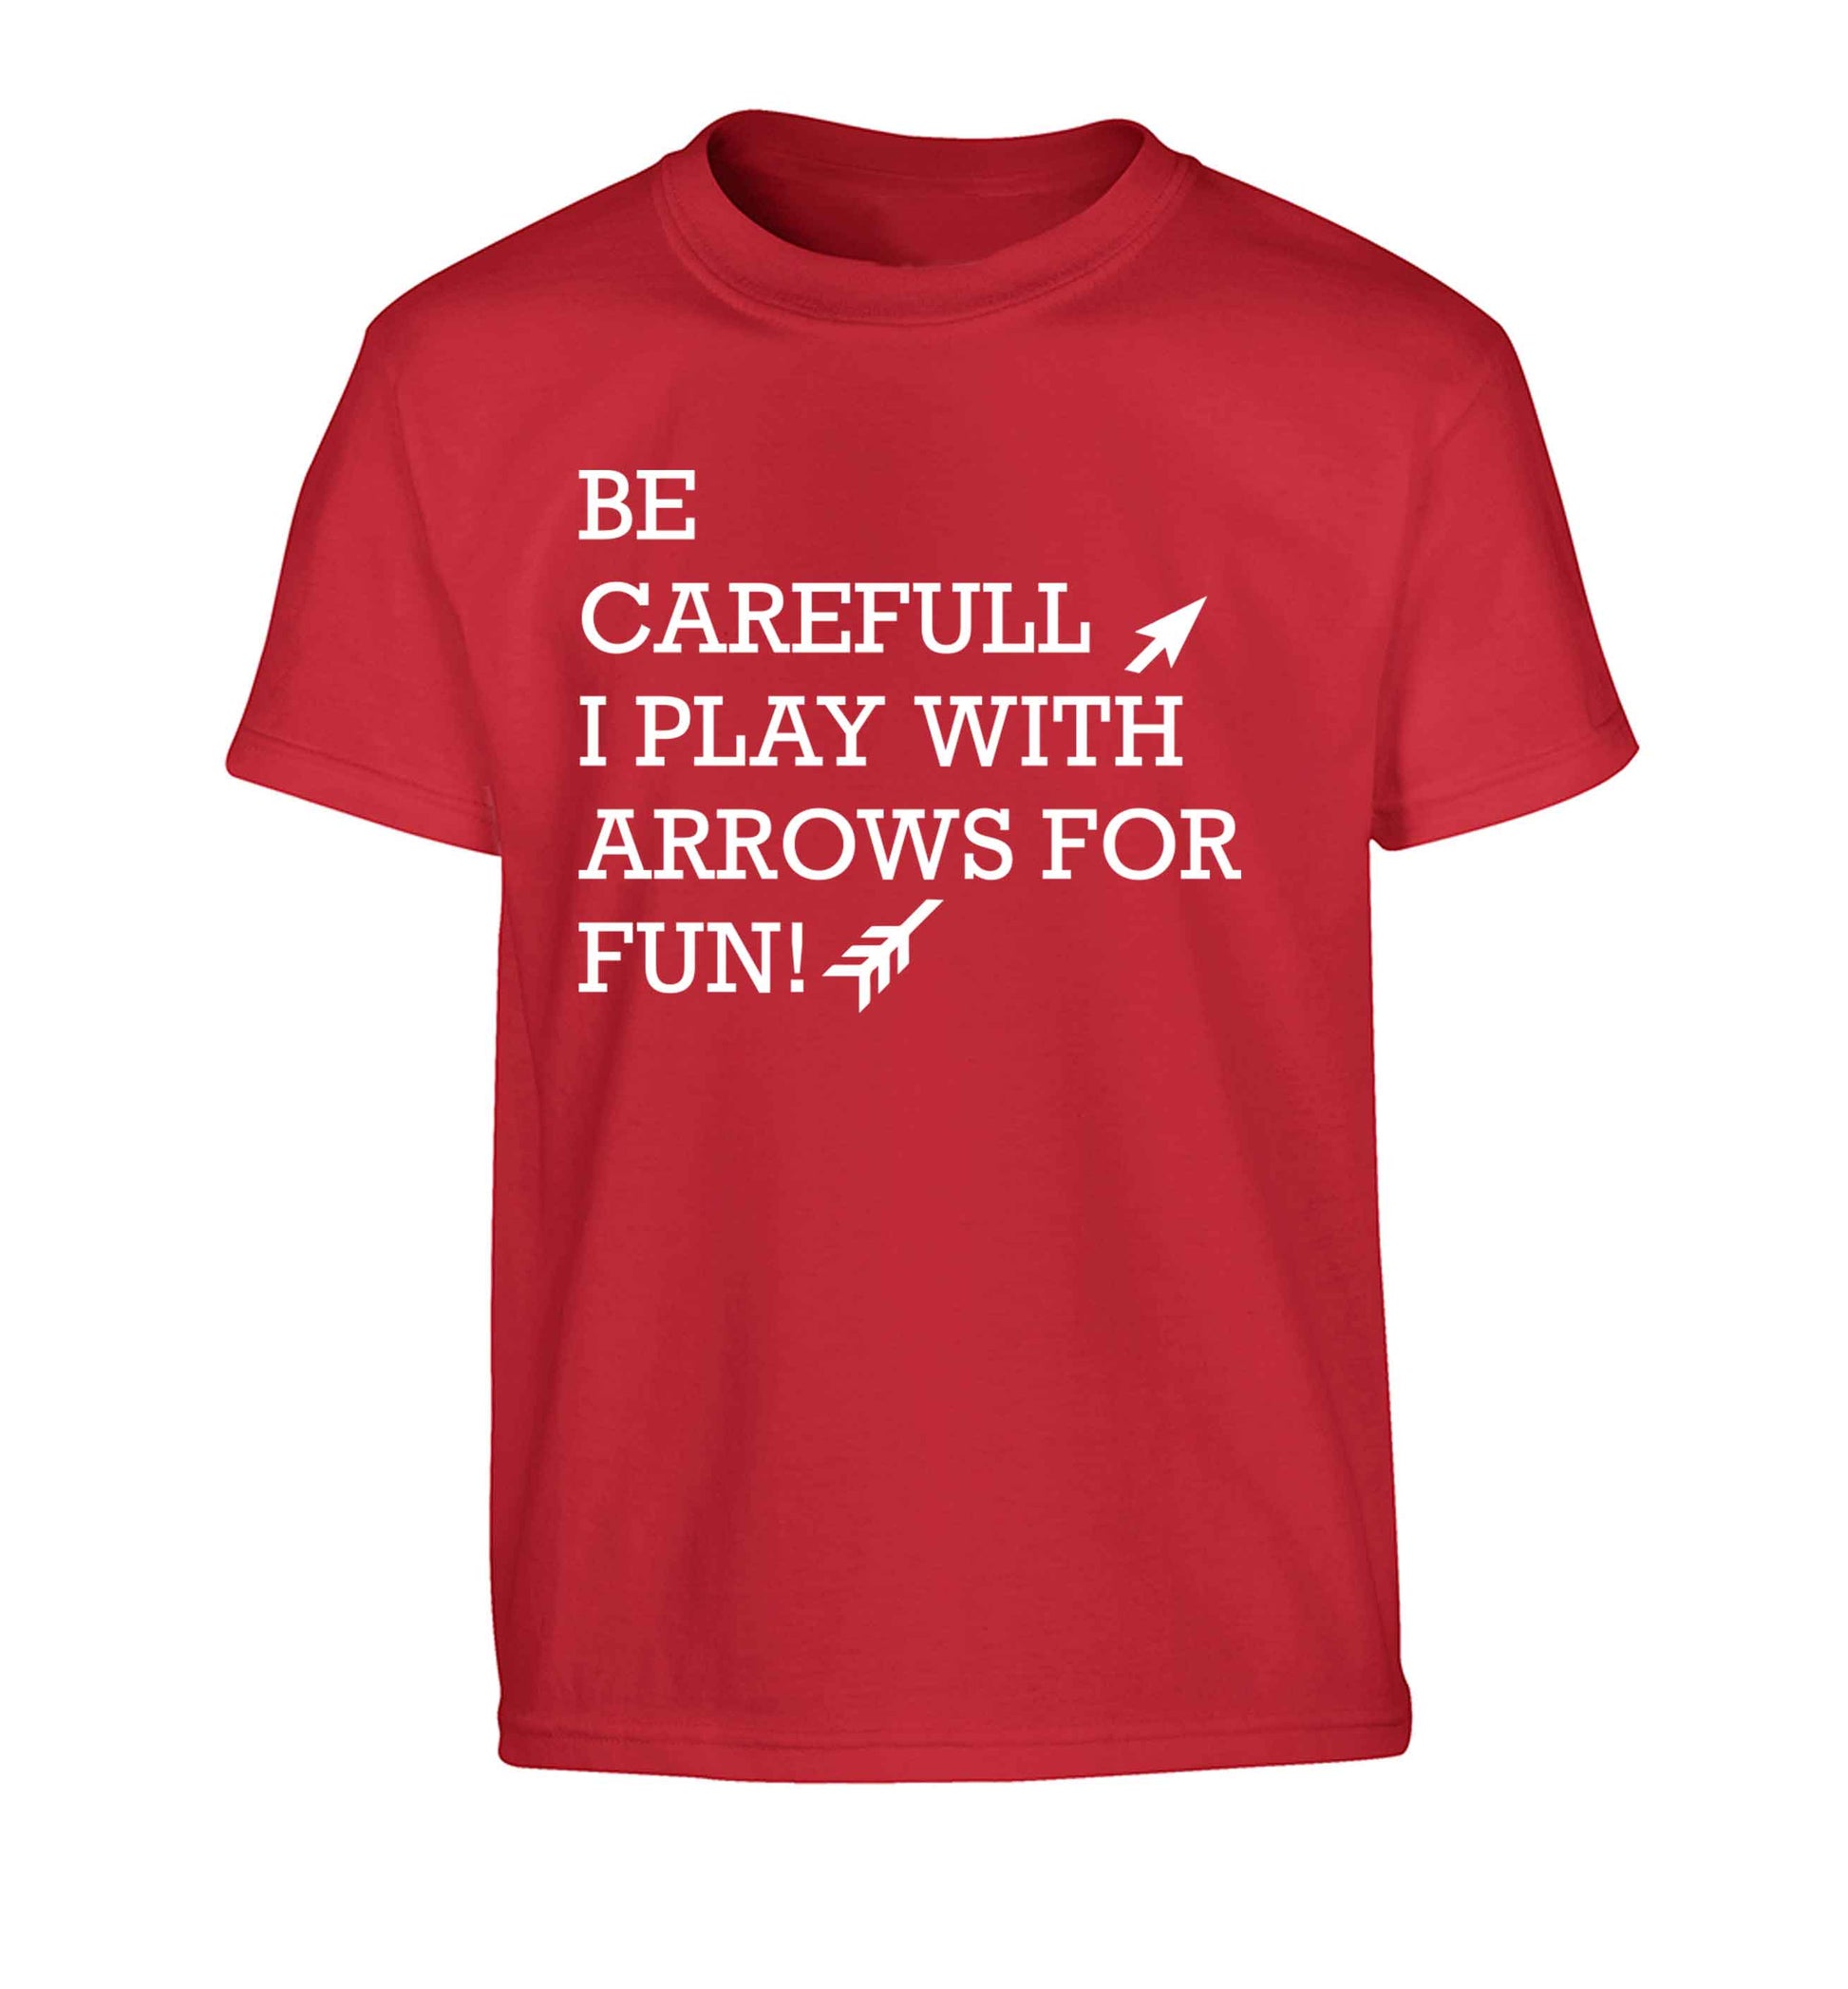 Be carefull I play with arrows for fun Children's red Tshirt 12-13 Years